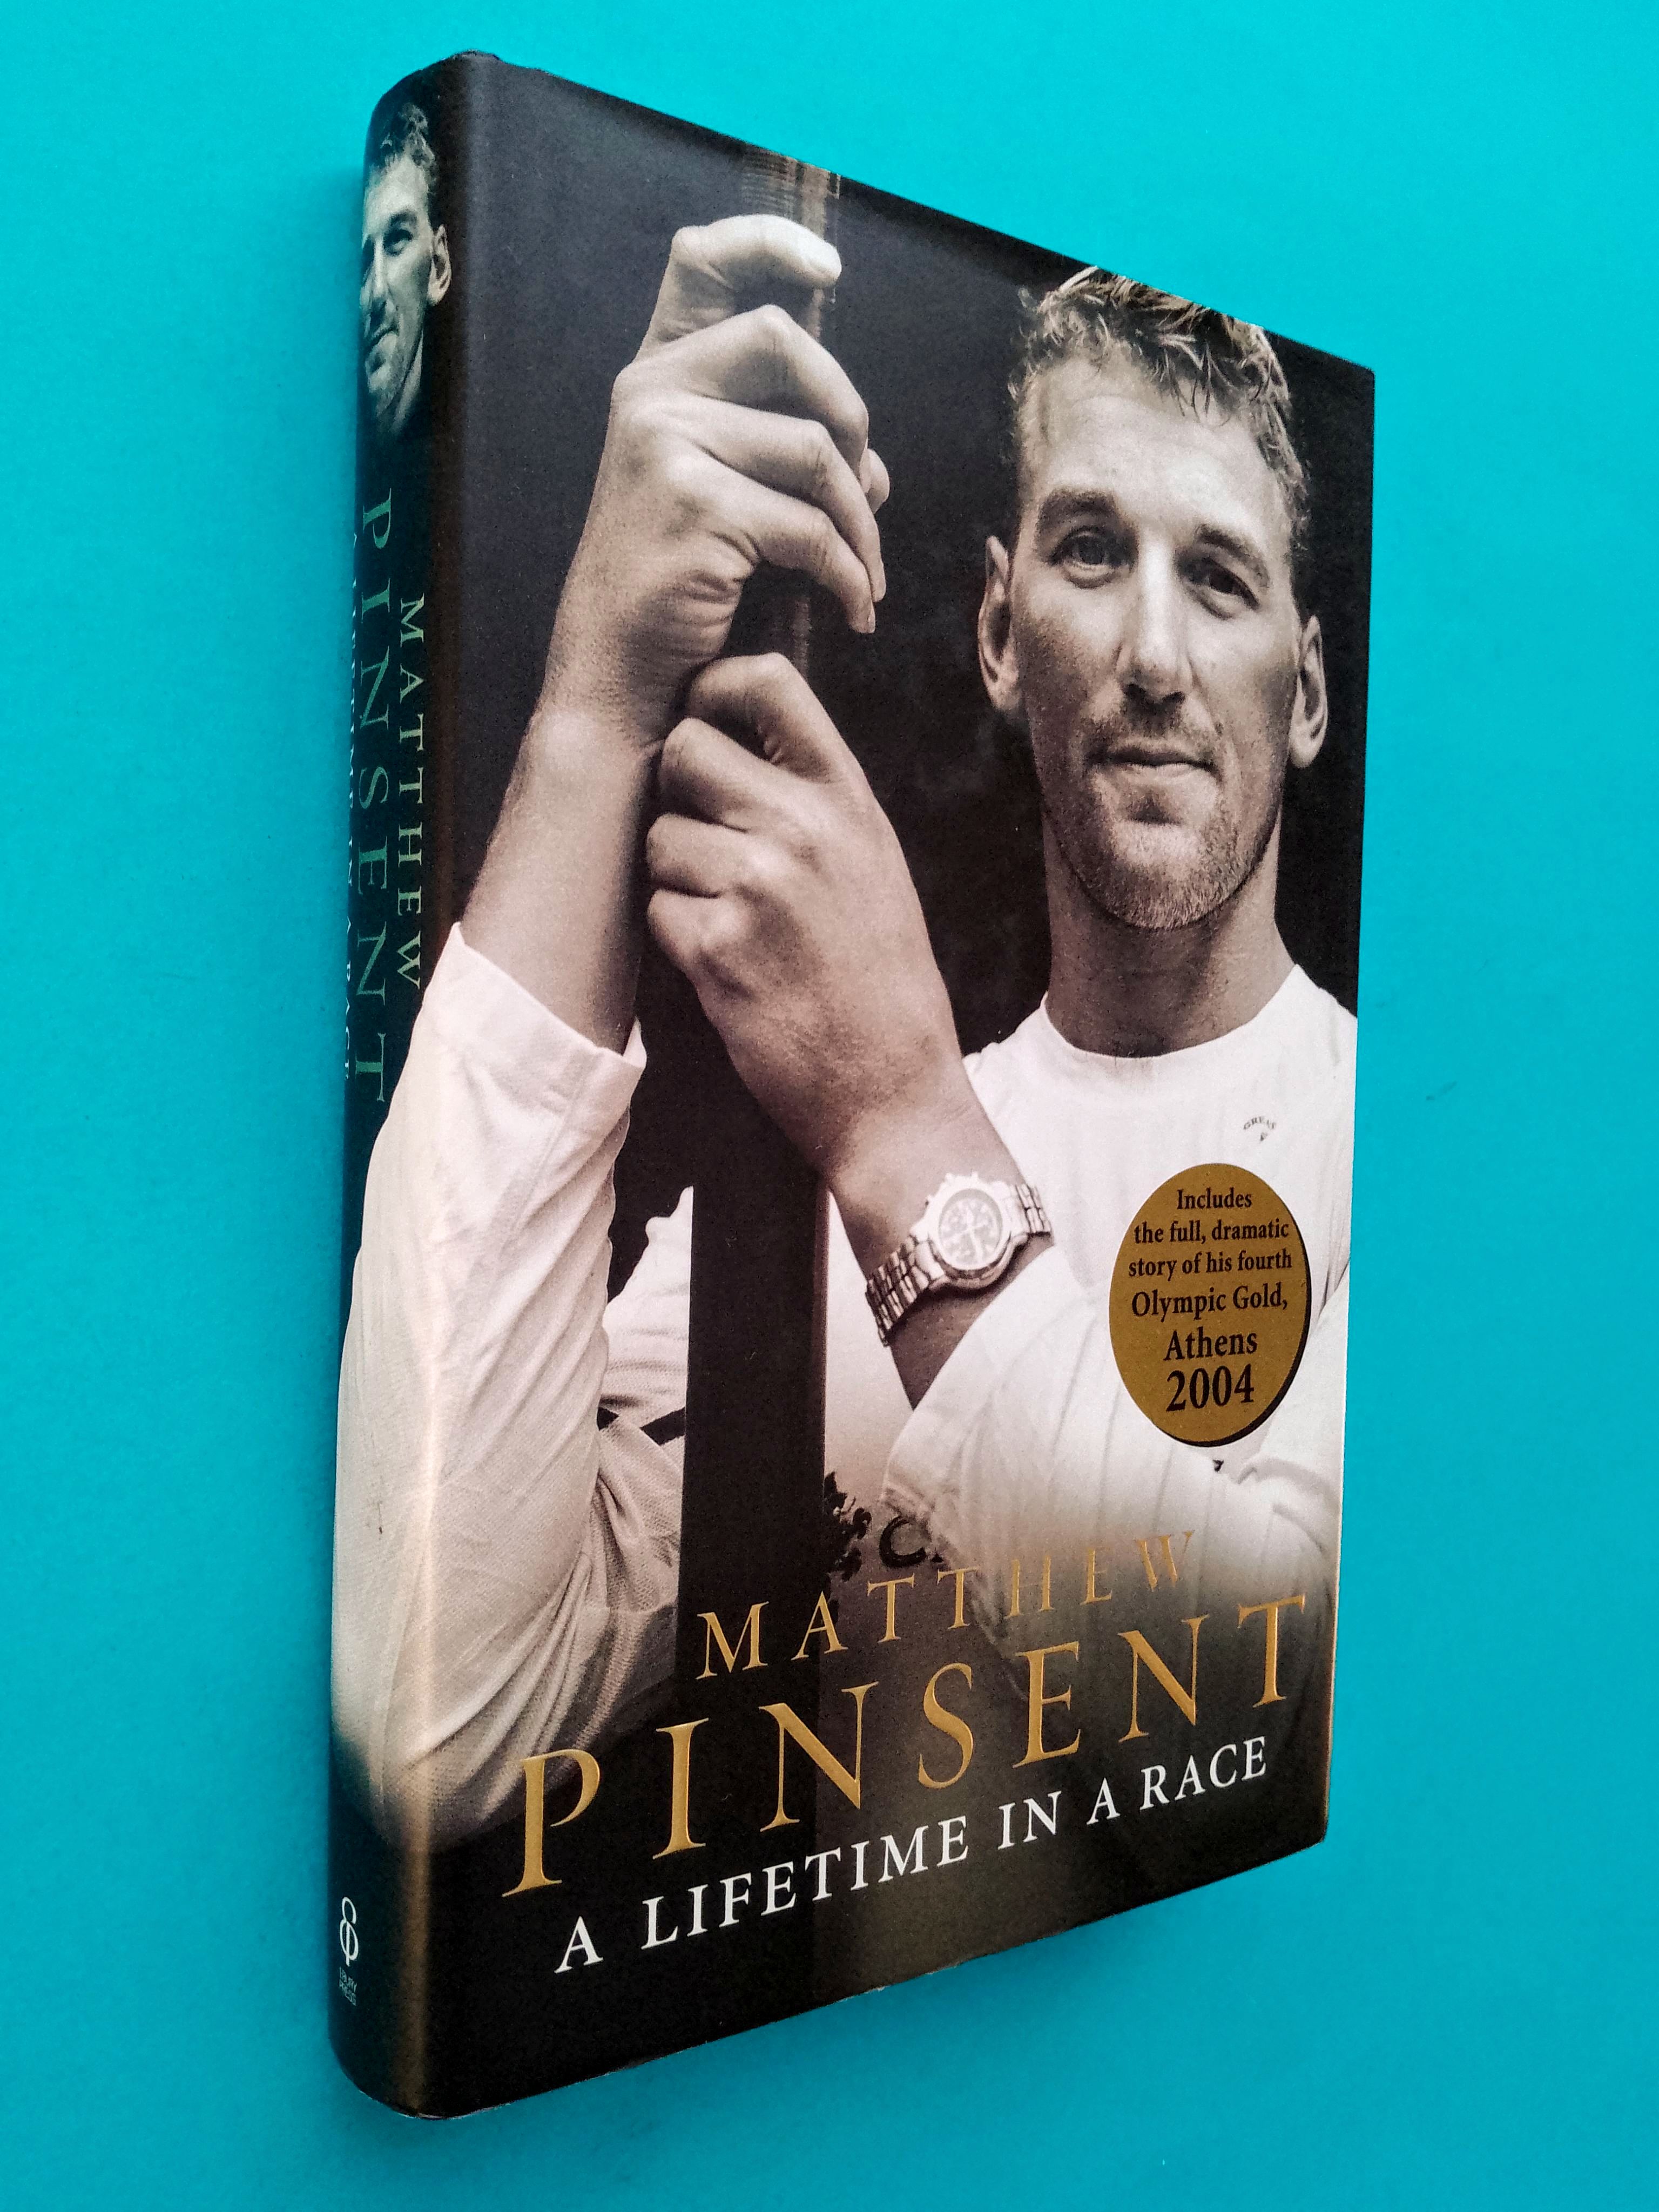 A Lifetime in a Race *SIGNED* - Matthew Pinsent